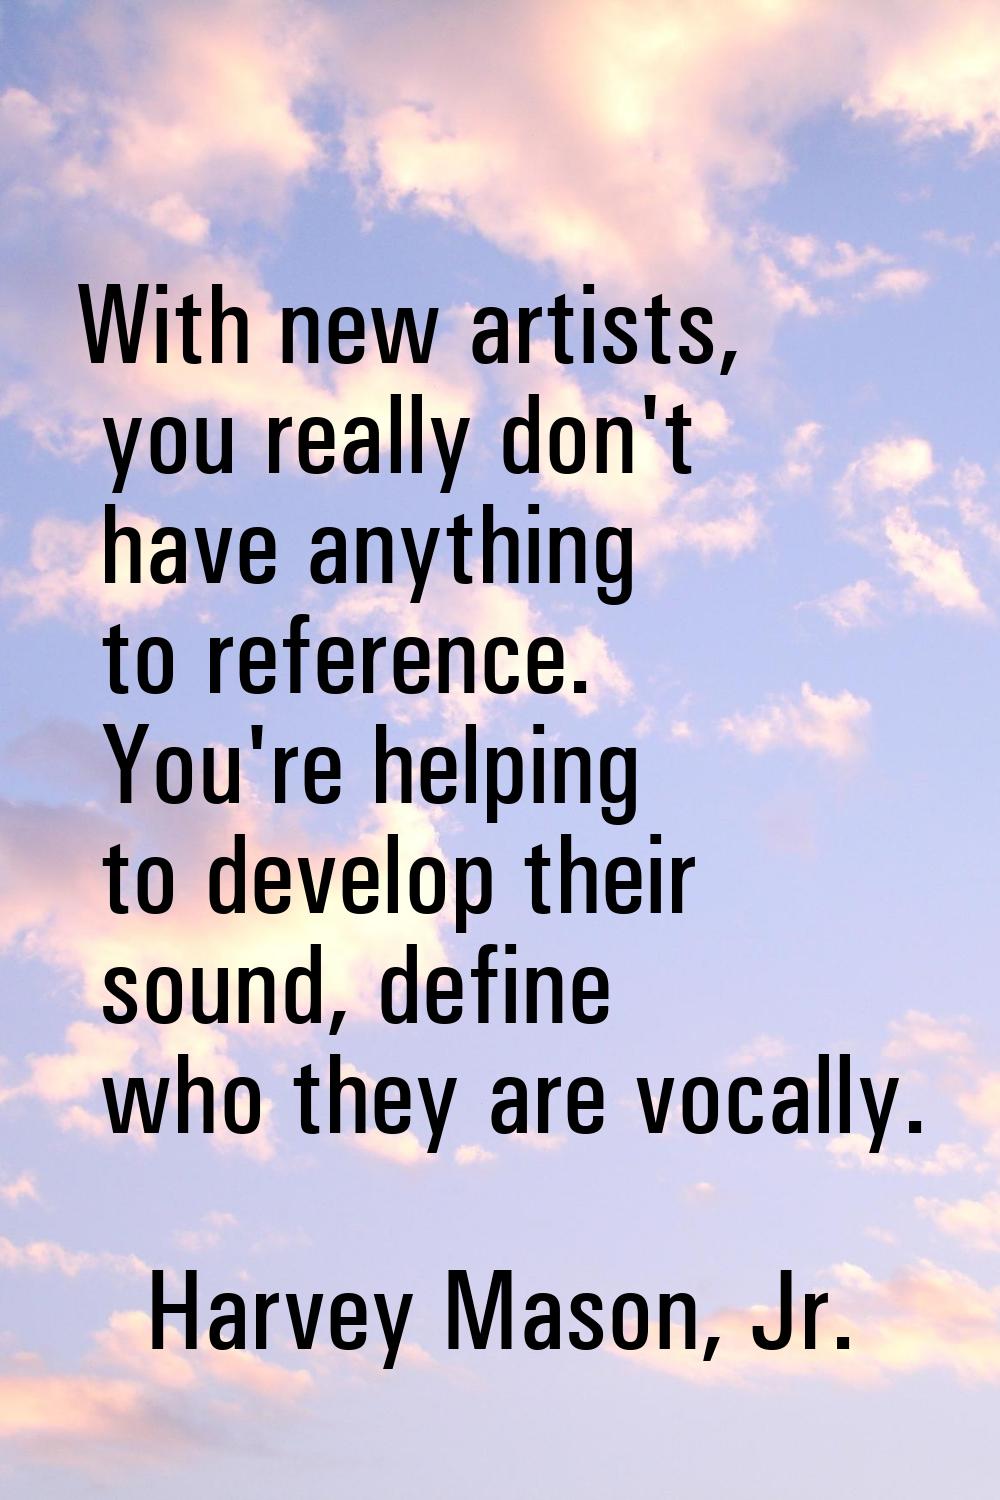 With new artists, you really don't have anything to reference. You're helping to develop their soun